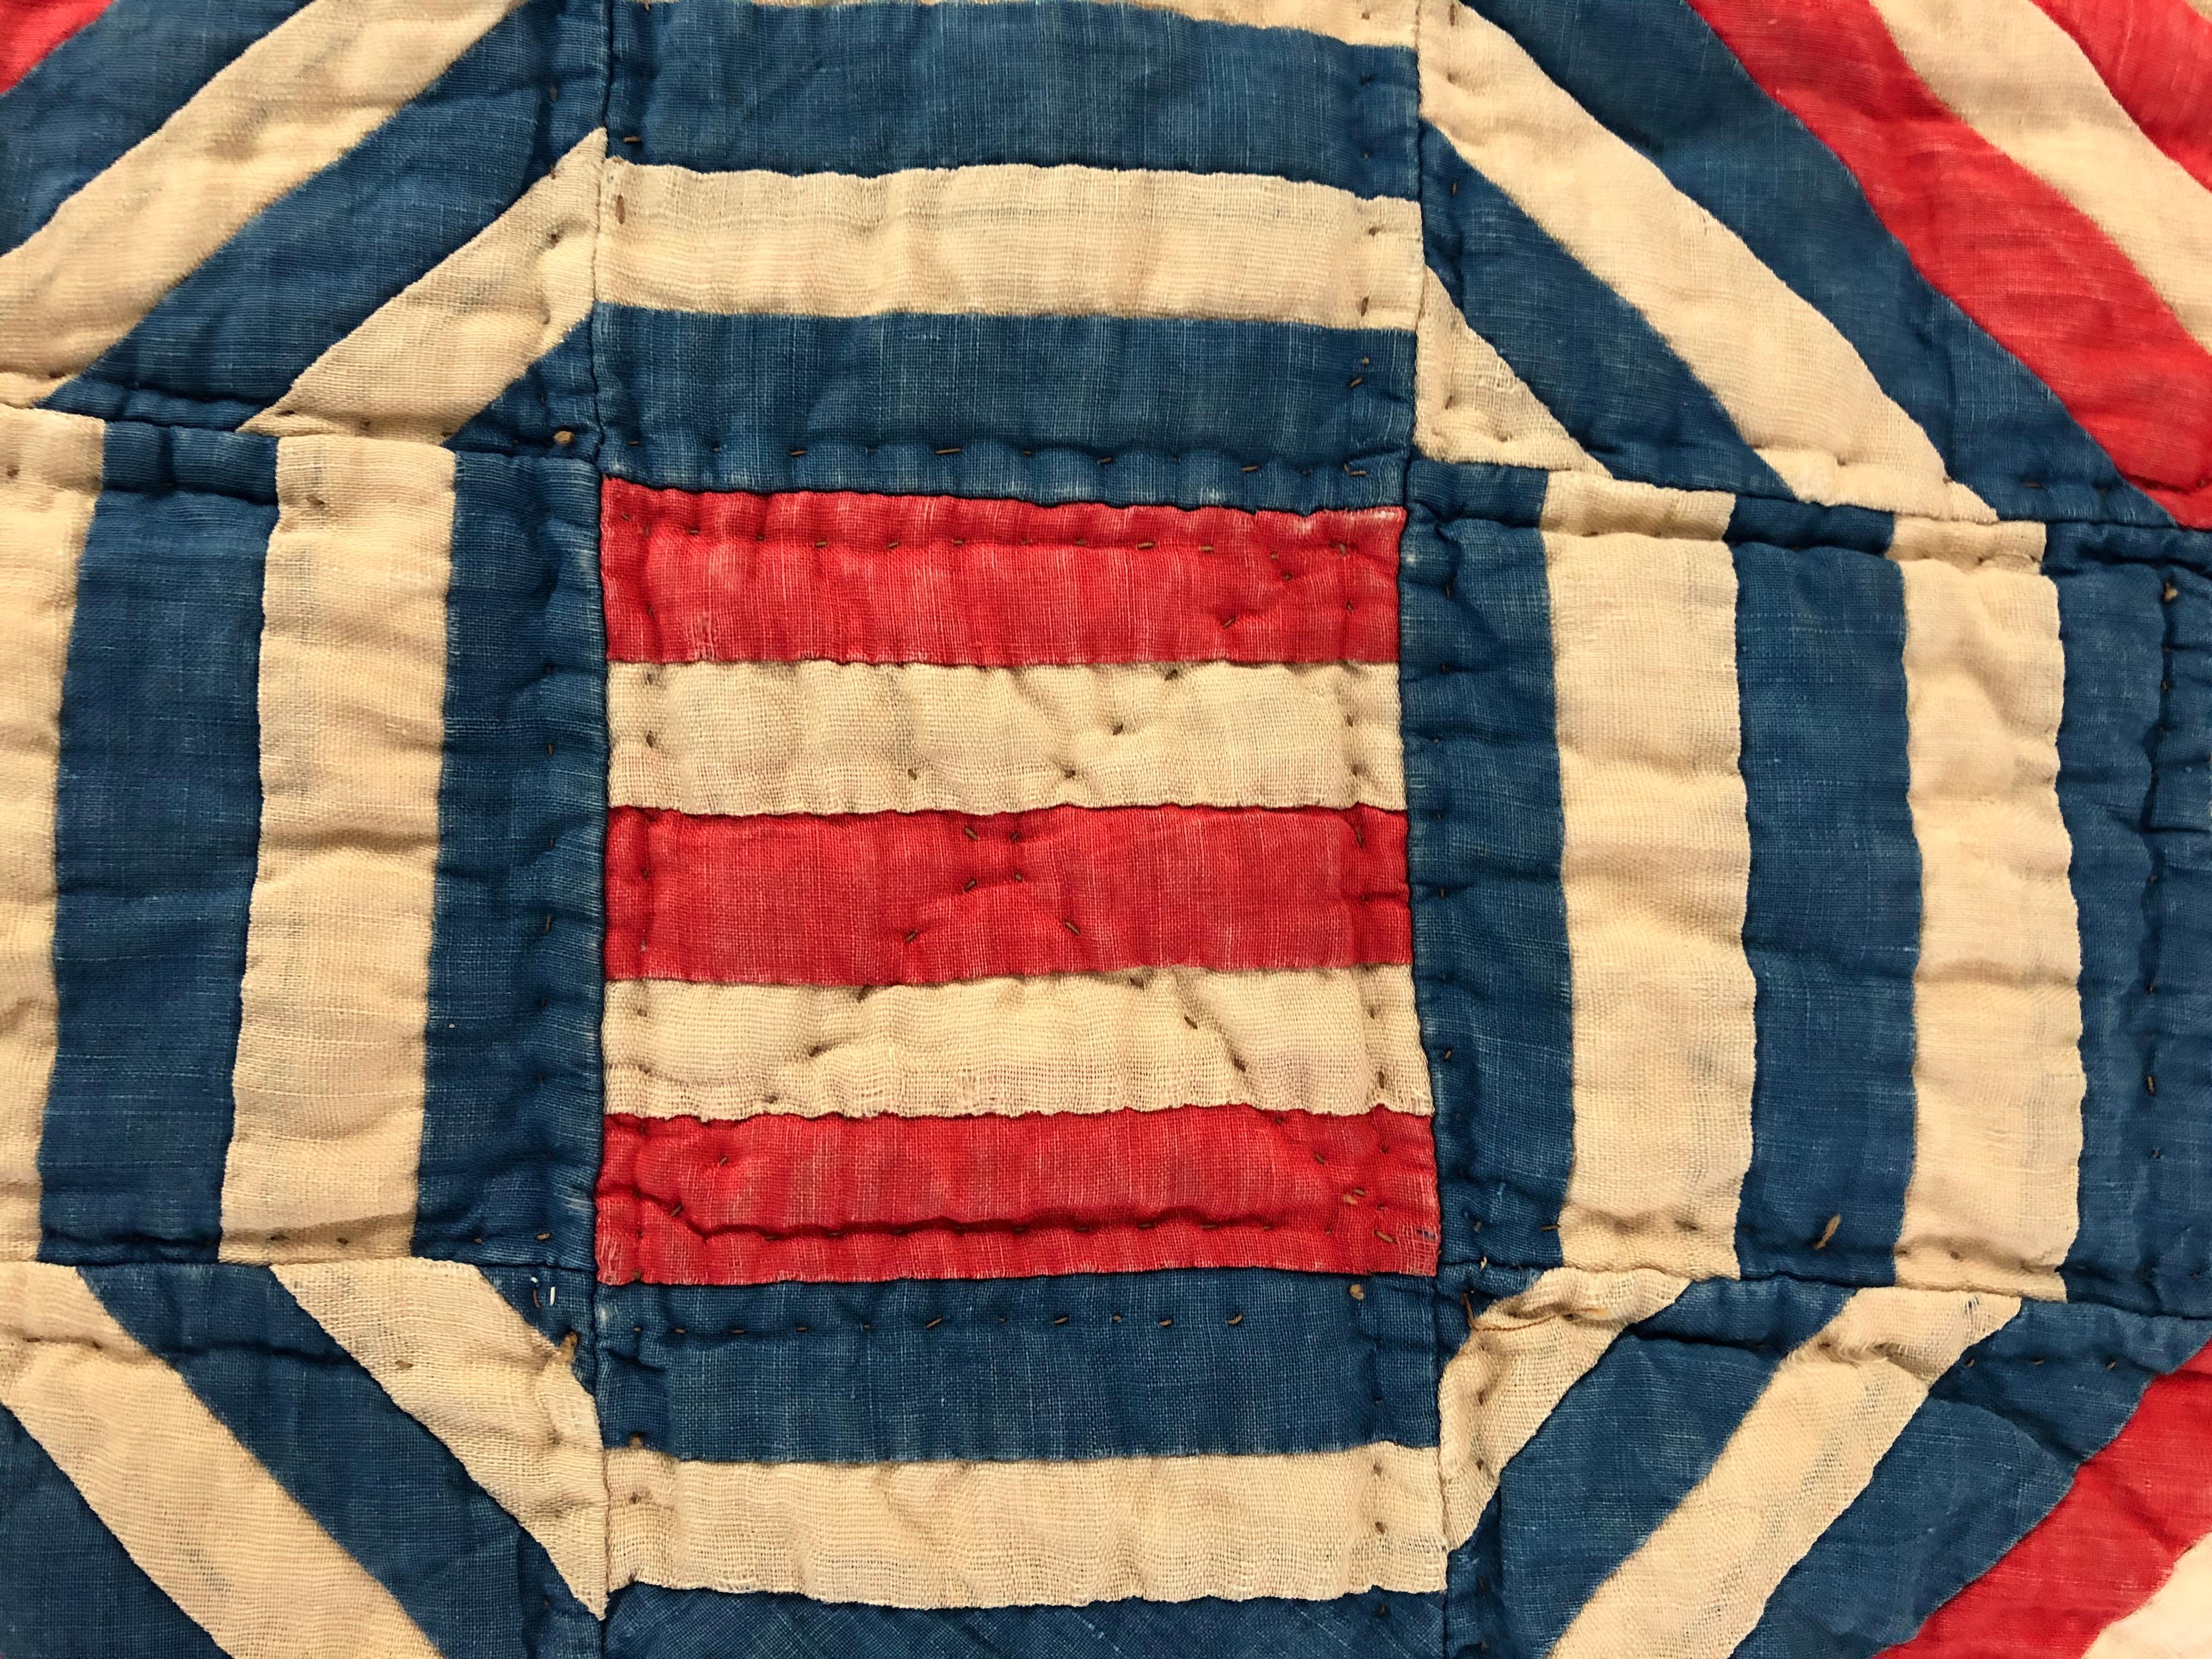 Late 19th Century American Folk Art Red White and Blue Geometric Crib Quilt Wall Hanging, c. 1876